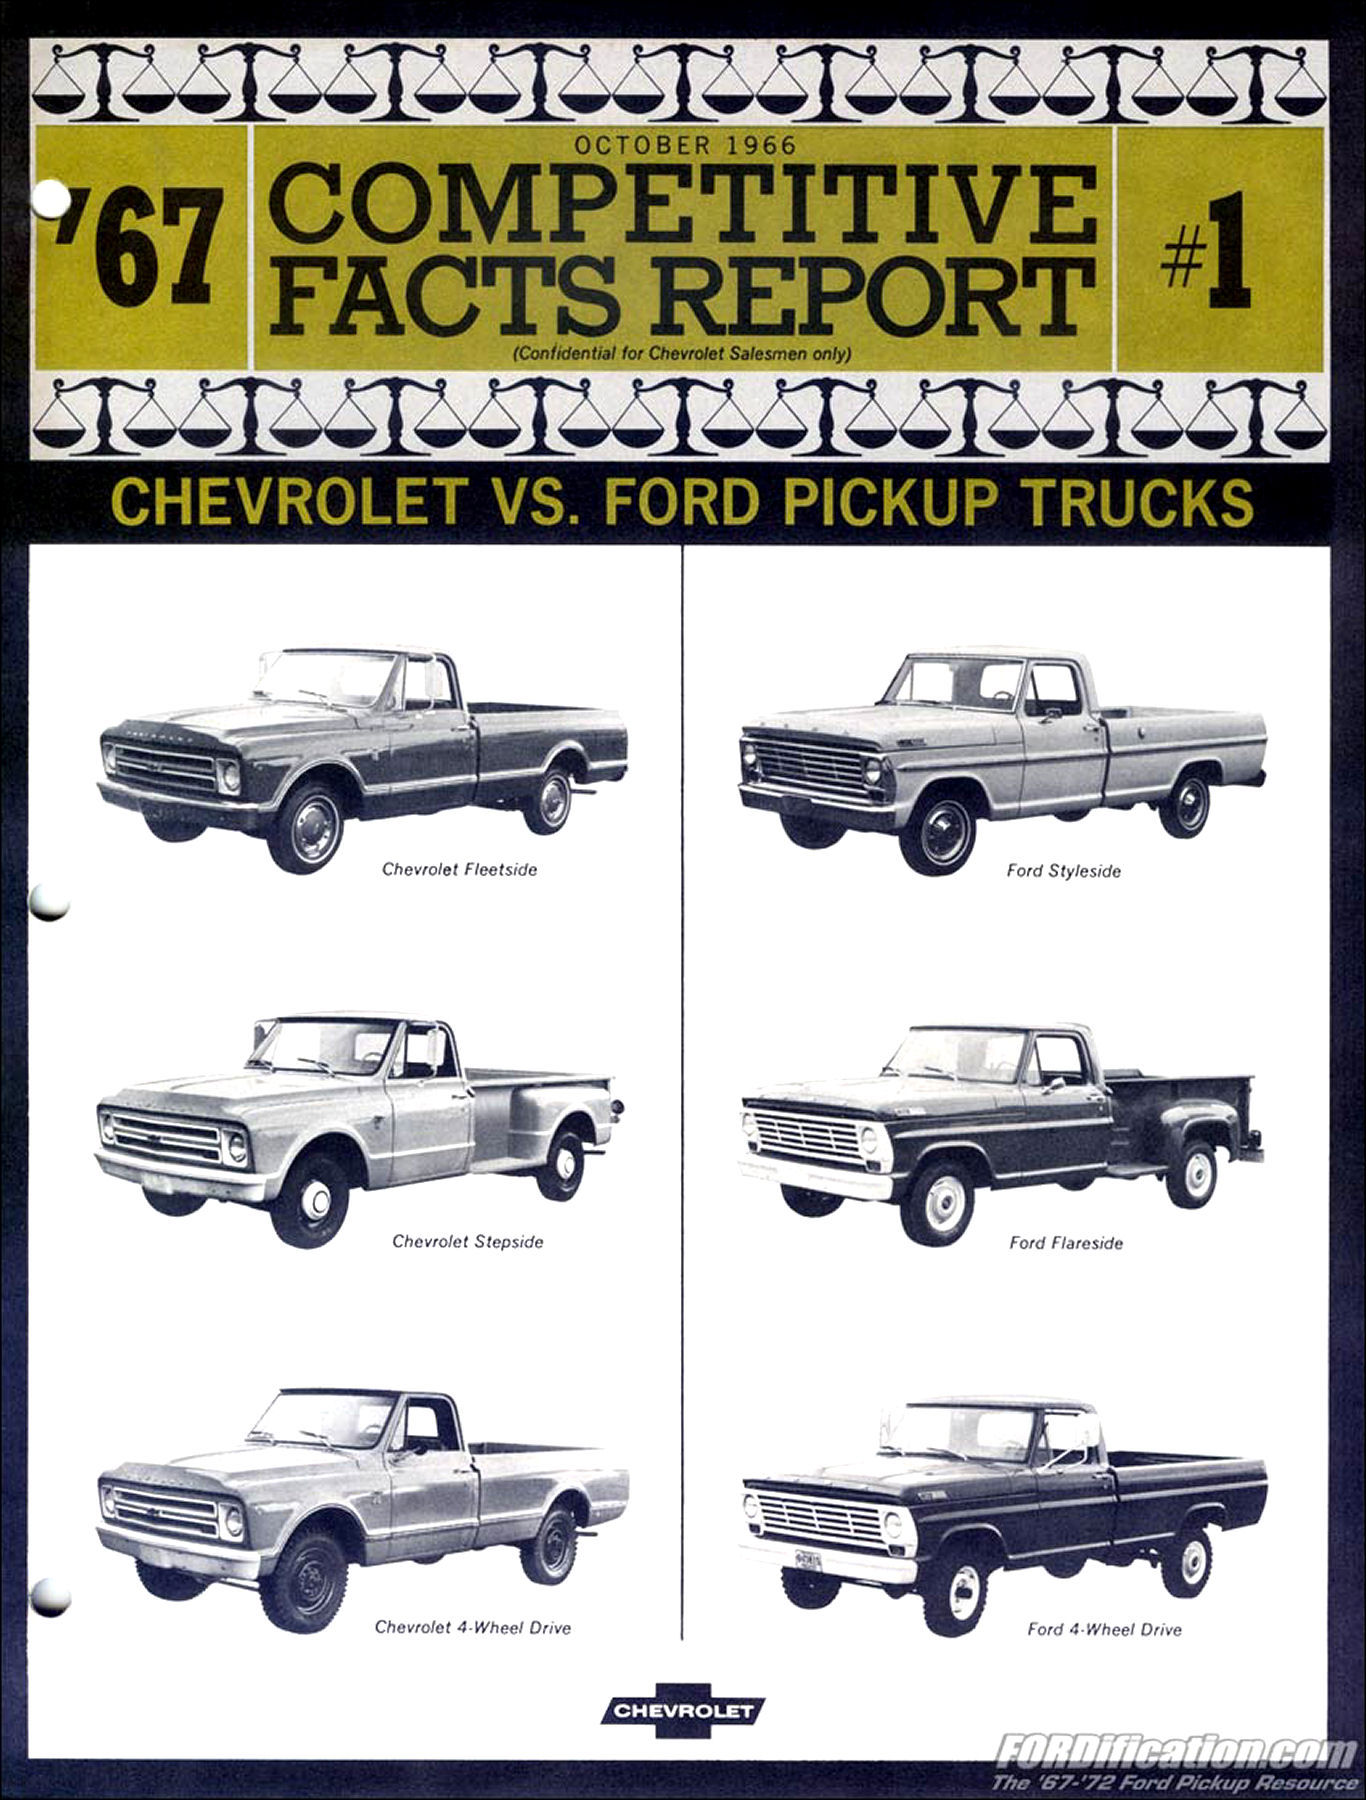 1967 Chevrolet vs Ford Trucks Competitive Facts-01